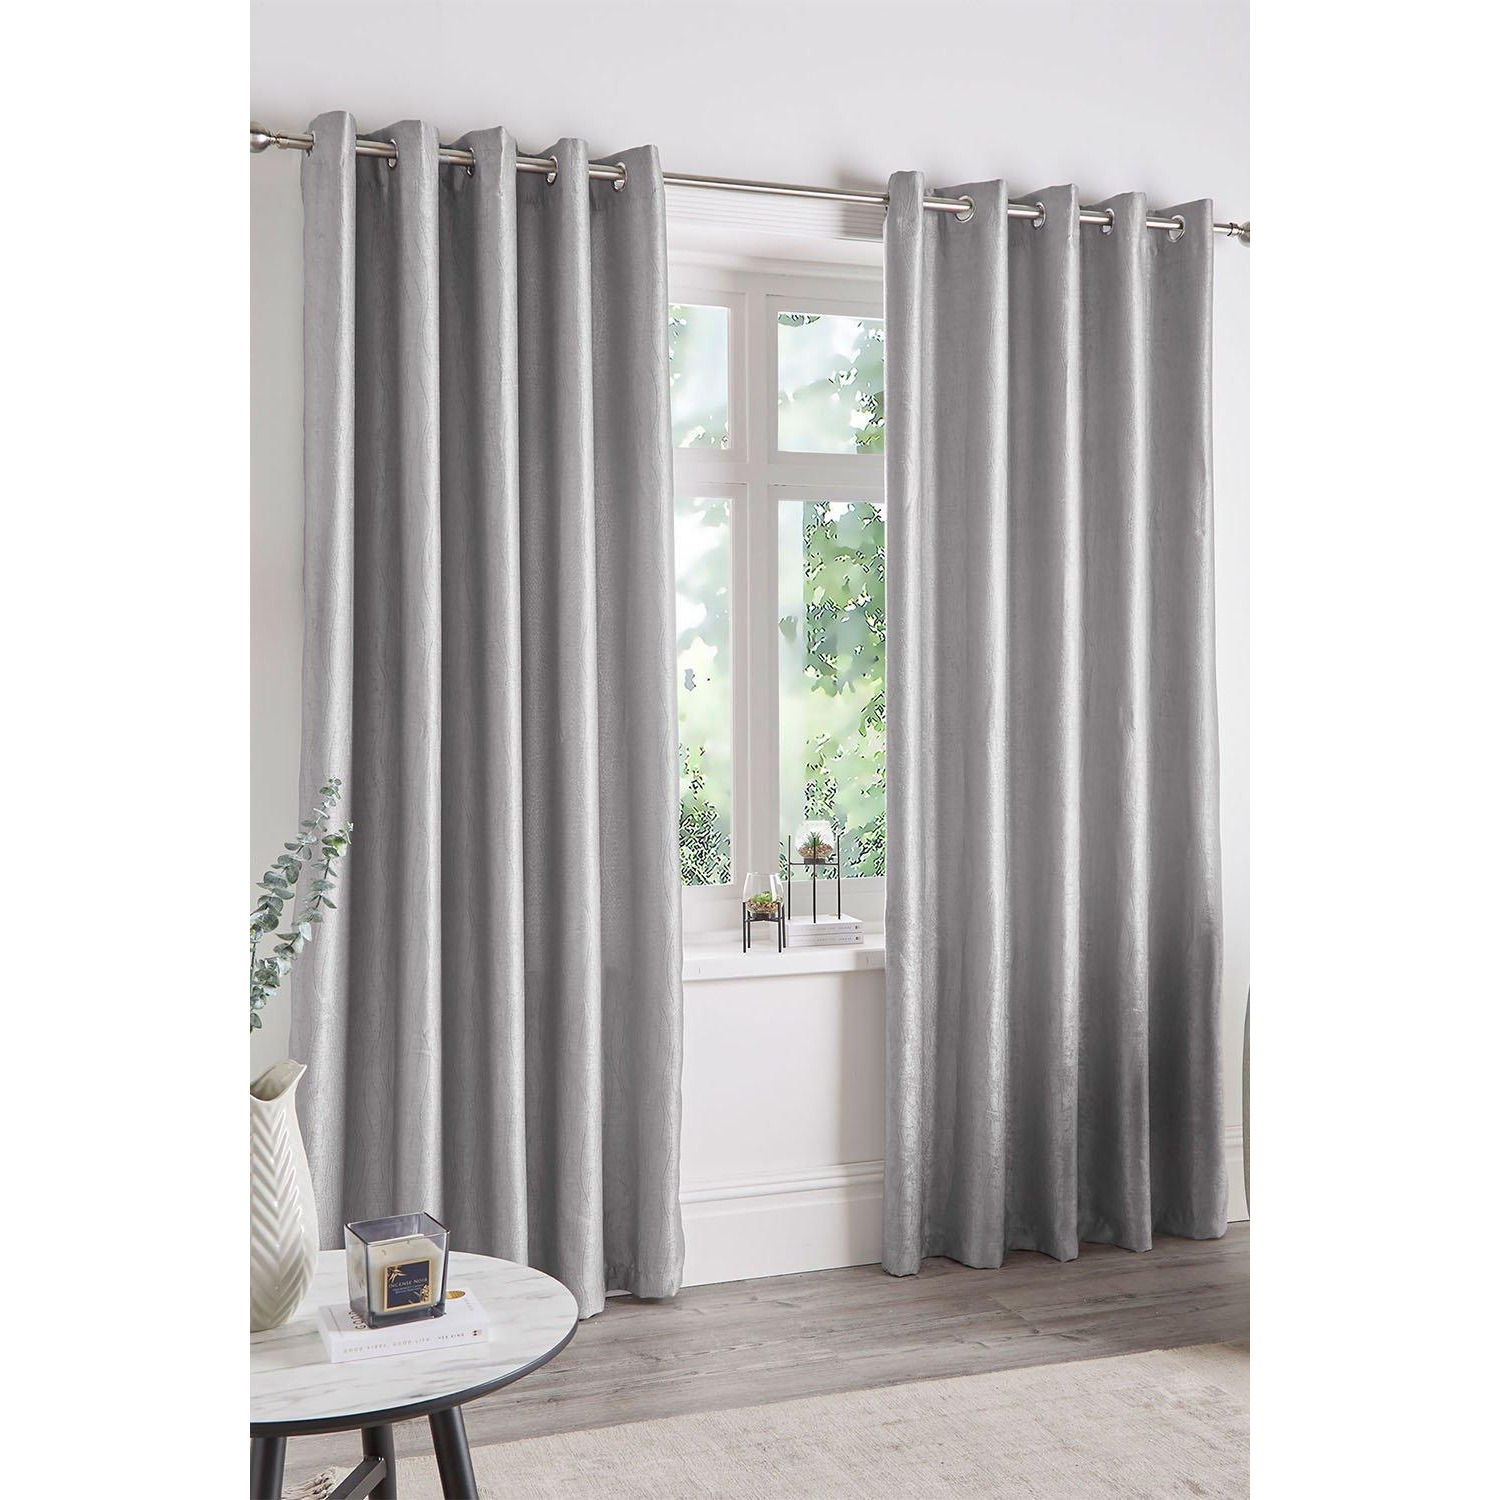 Thermal Blockout Curtains - image 1